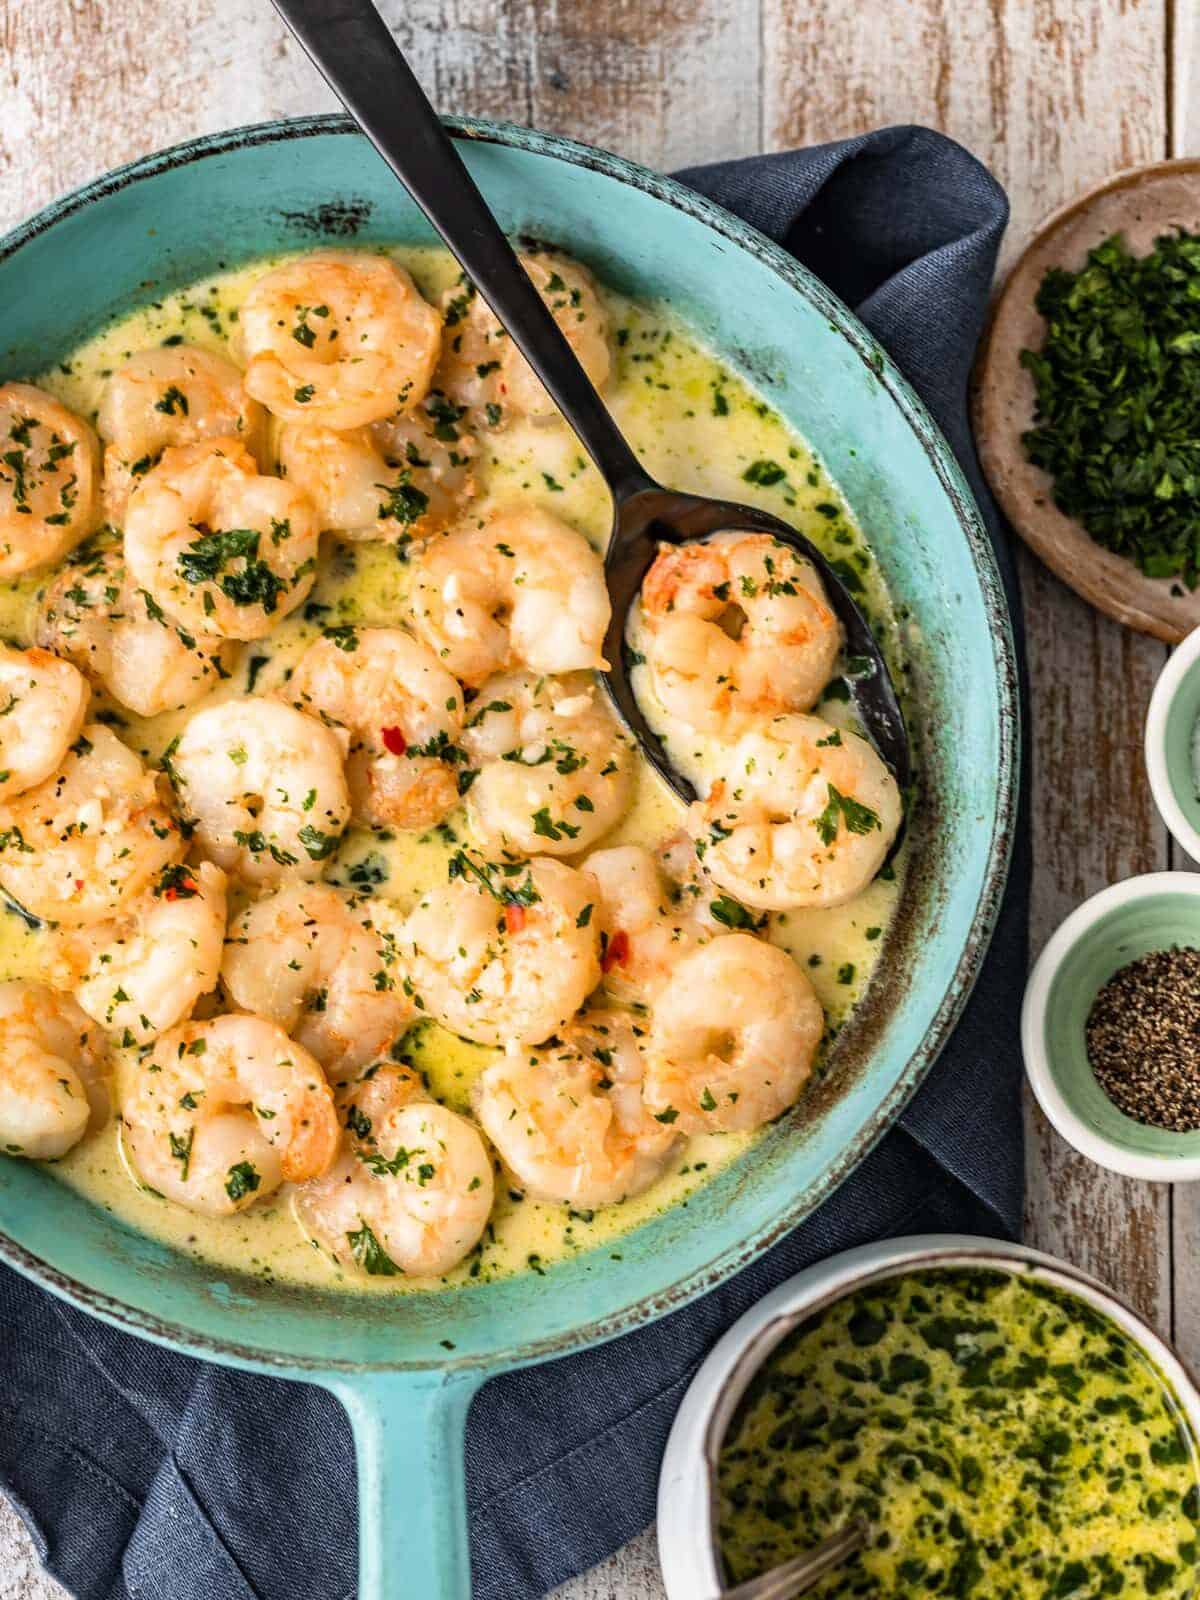 Garlic Shrimp is a simple, easy recipe to make for appetizers or for dinner. This spicy garlic shrimp recipe is just SO tasty, and only takes about 10 minutes to makes. Serve this sauteed garlic shrimp as a quick app, or turn it into a creamy garlic shrimp pasta. Either way, everyone will love it!